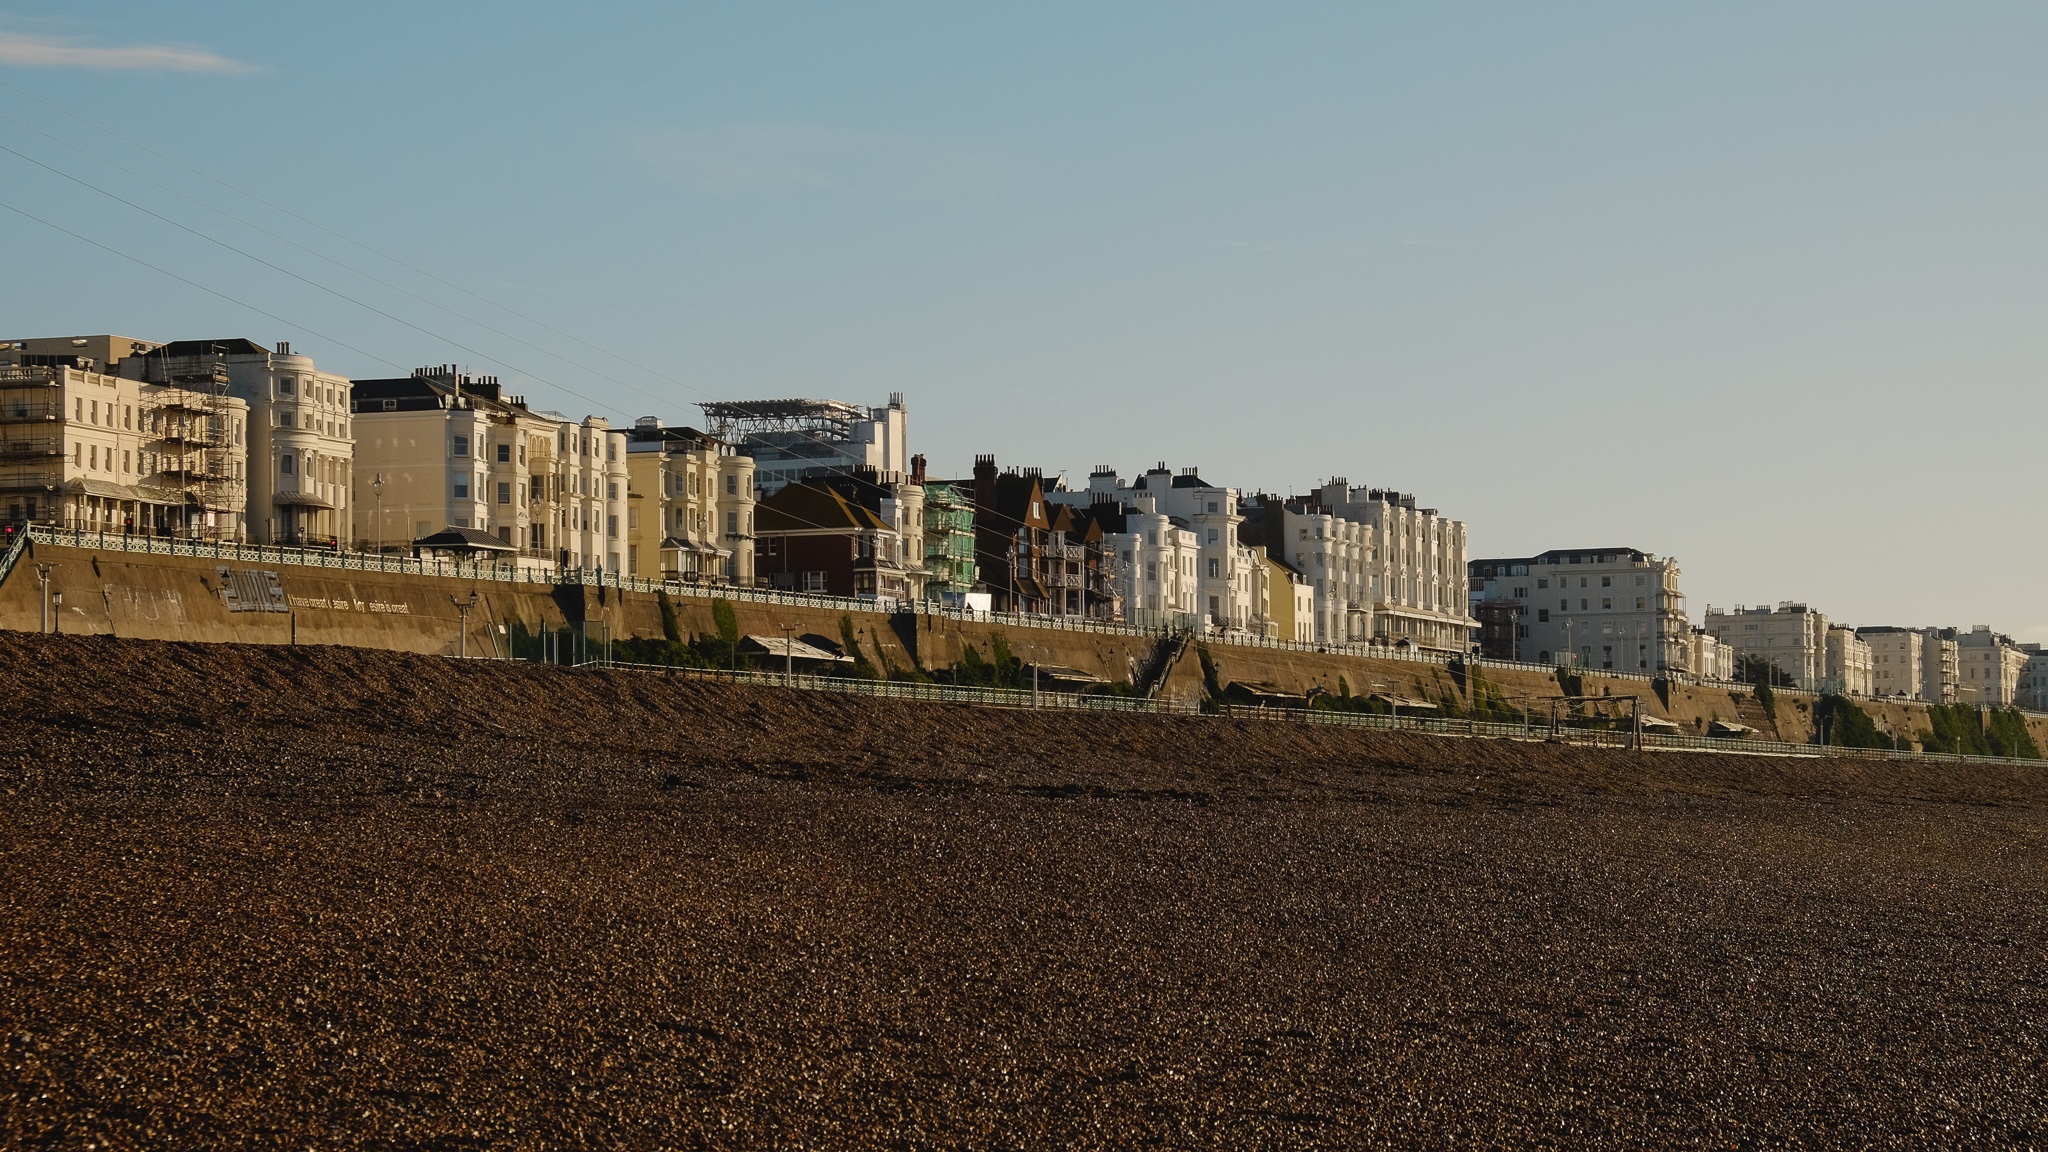 Houses and hotels along the beach being struck by a warm morning light, the pebbled beach in the foreground